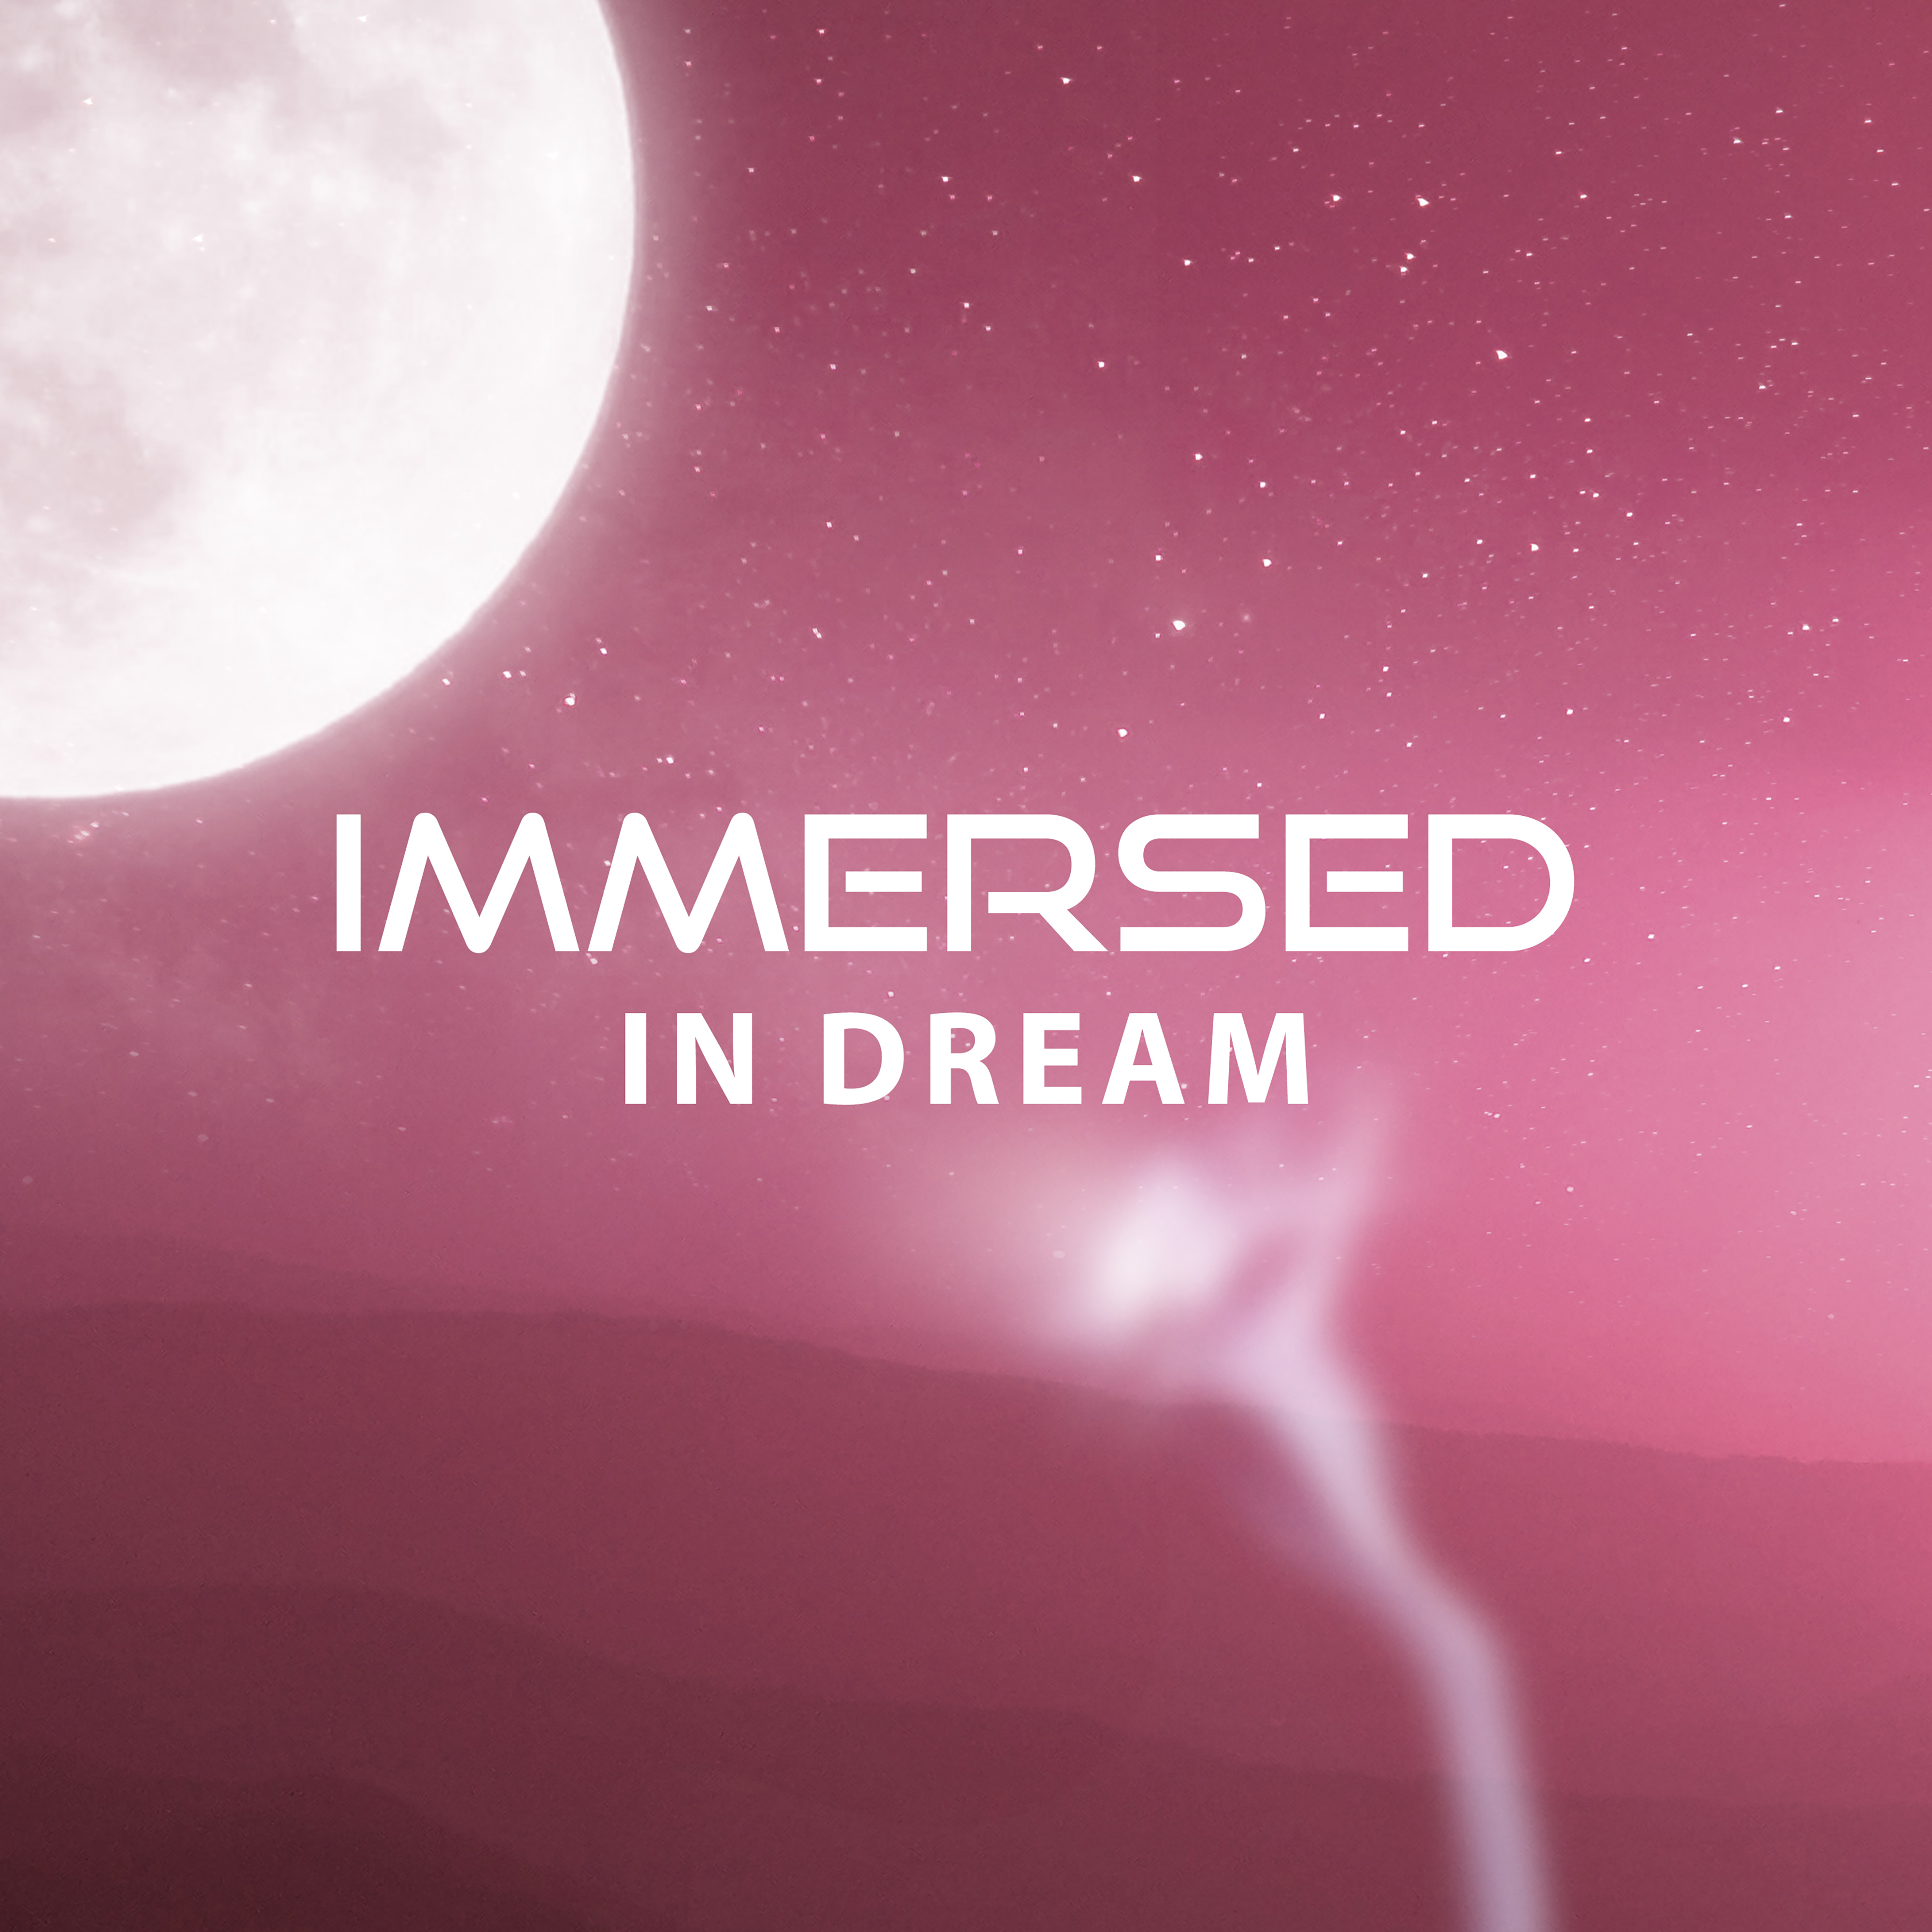 Immersed in Dream - Time for Bed, Wonderful Dream, Moments with Eyes Closed, Music for Sleep